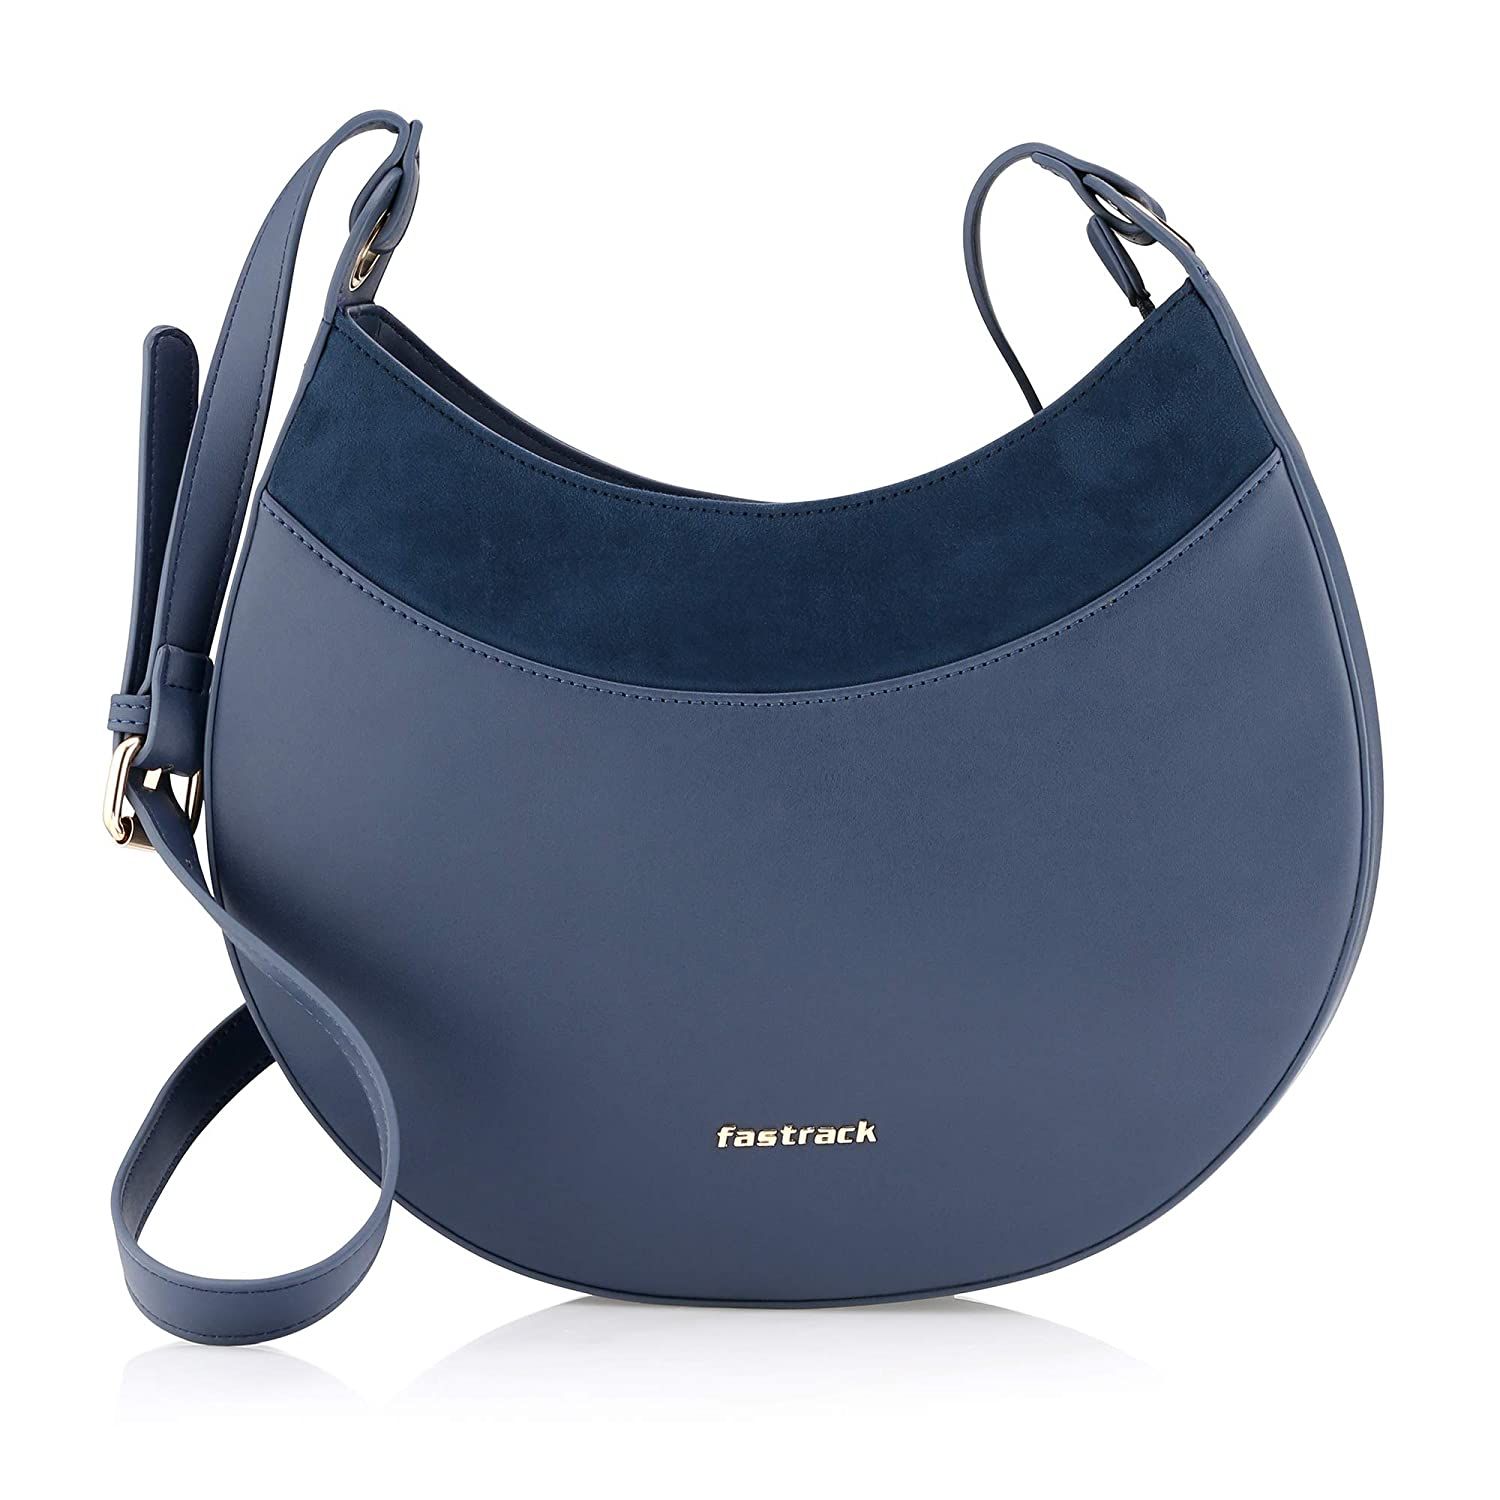 Fastrack Fashion: Stylish Bags for Every
Adventure